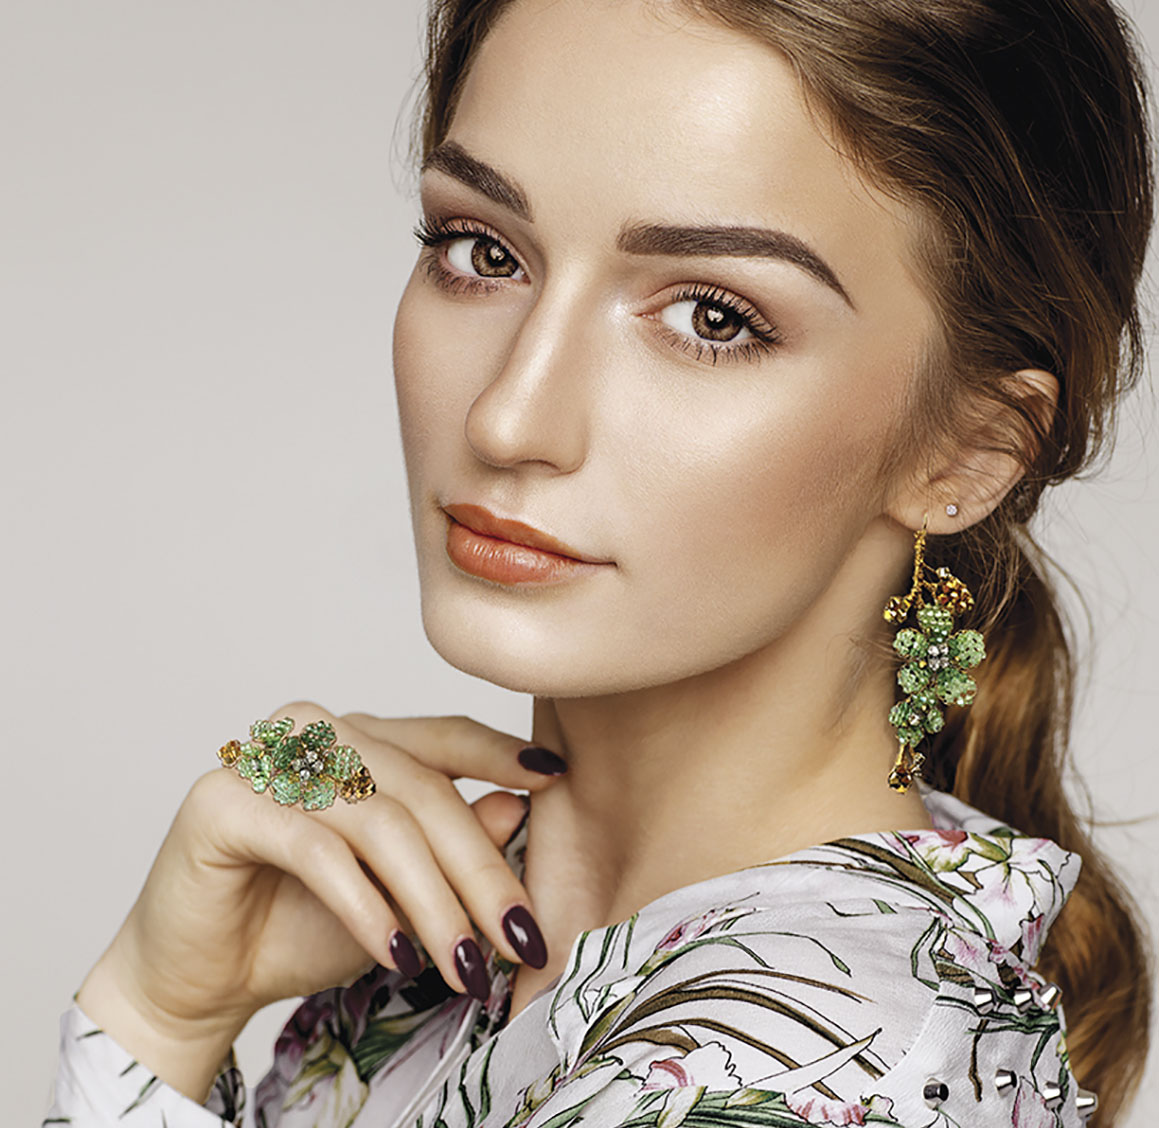 A model wearing a floral blouses poses with floral-inspired cocktail ring and earrings, both featuring green stones, by jewelry designer Mindy Lam